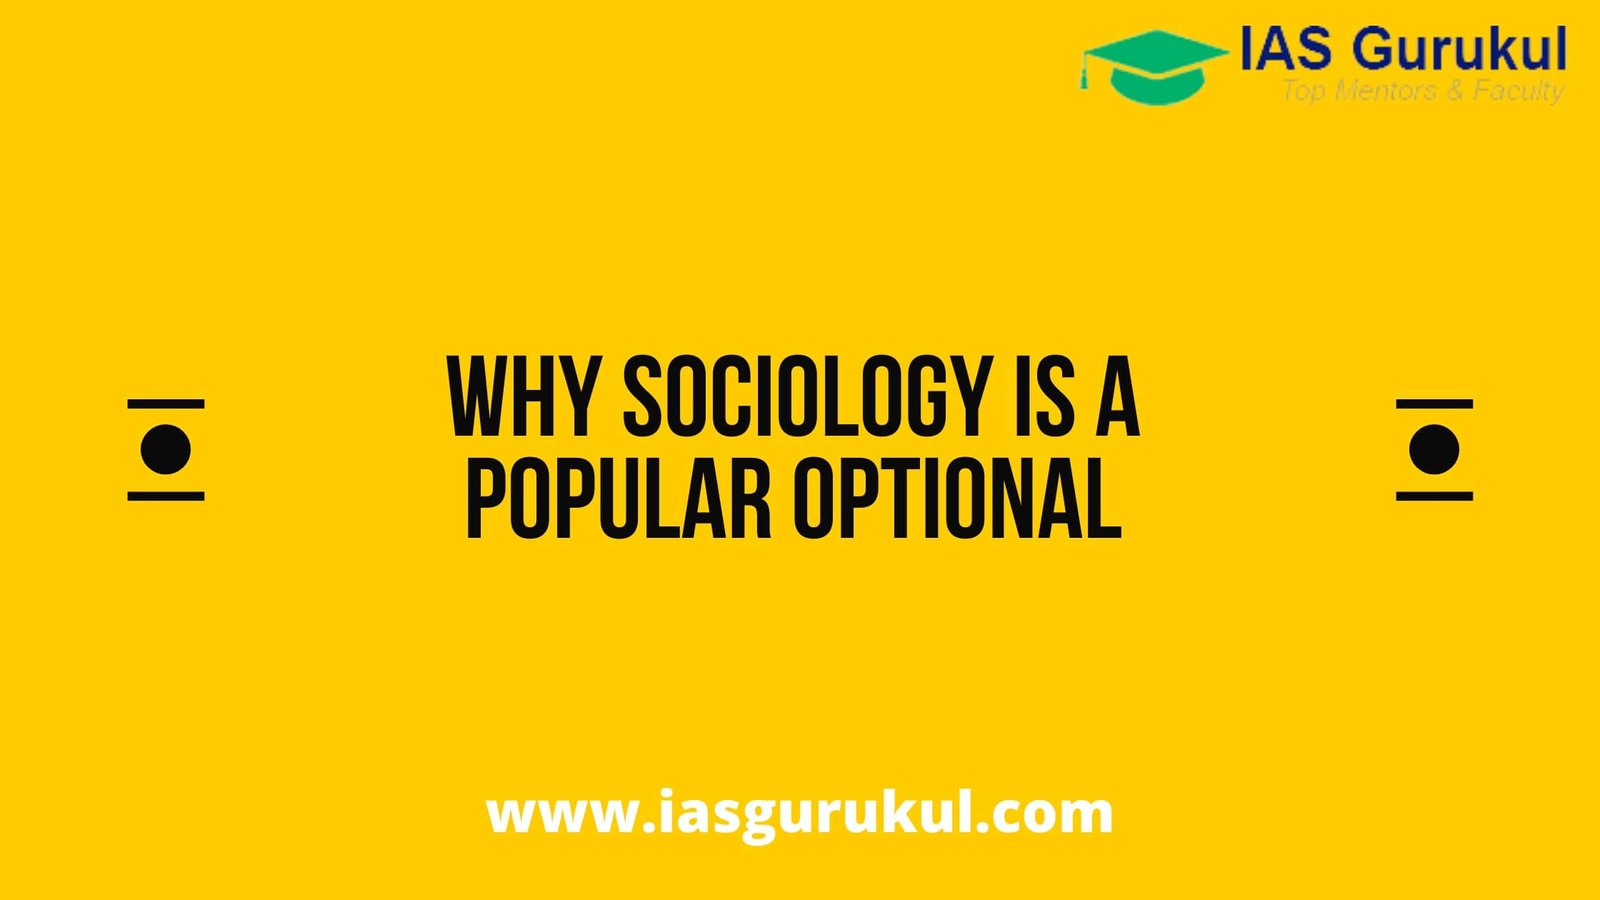 Why Sociology is a Popular Optional